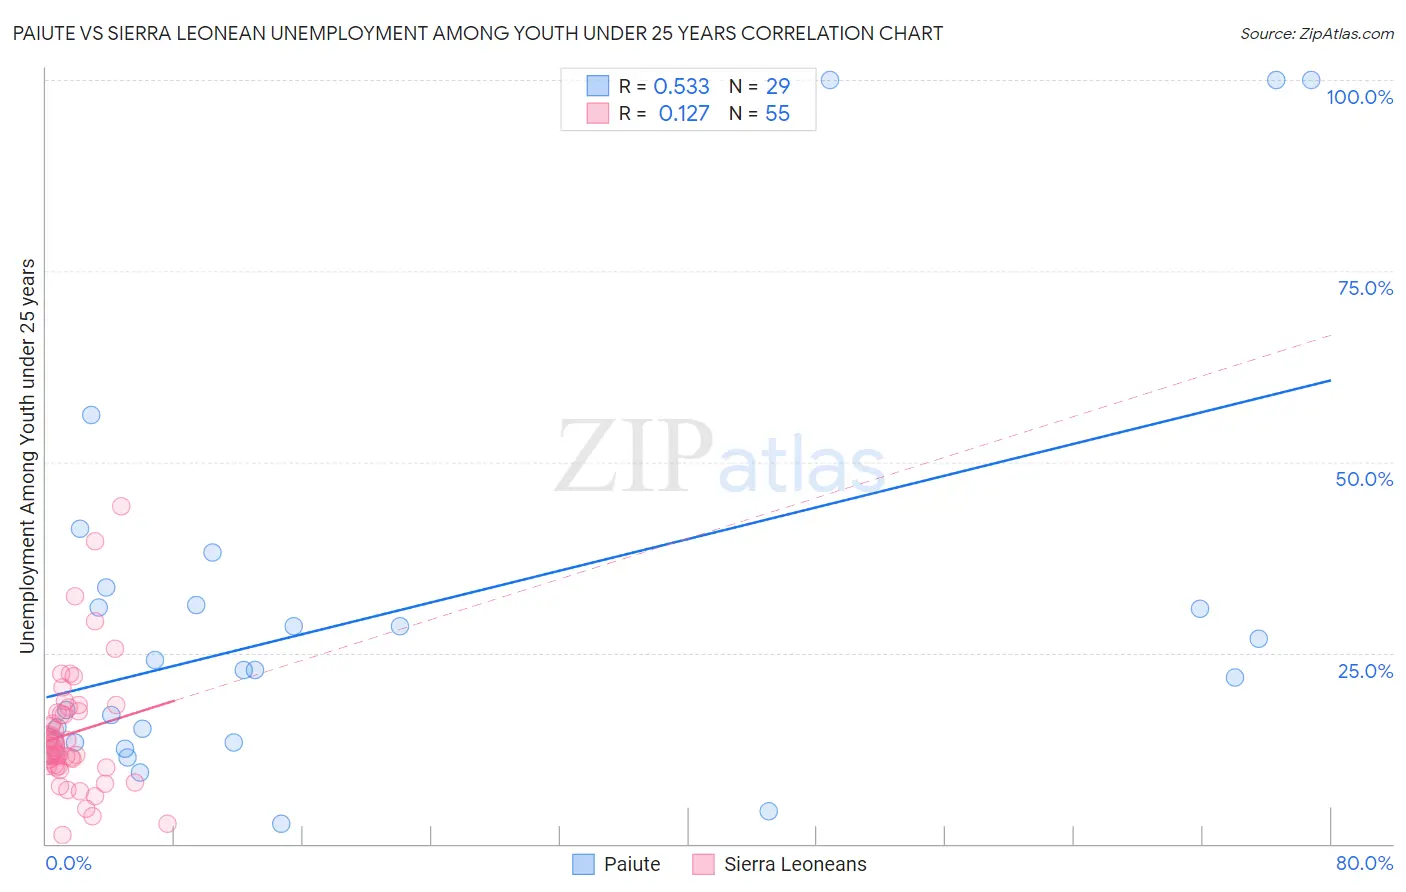 Paiute vs Sierra Leonean Unemployment Among Youth under 25 years